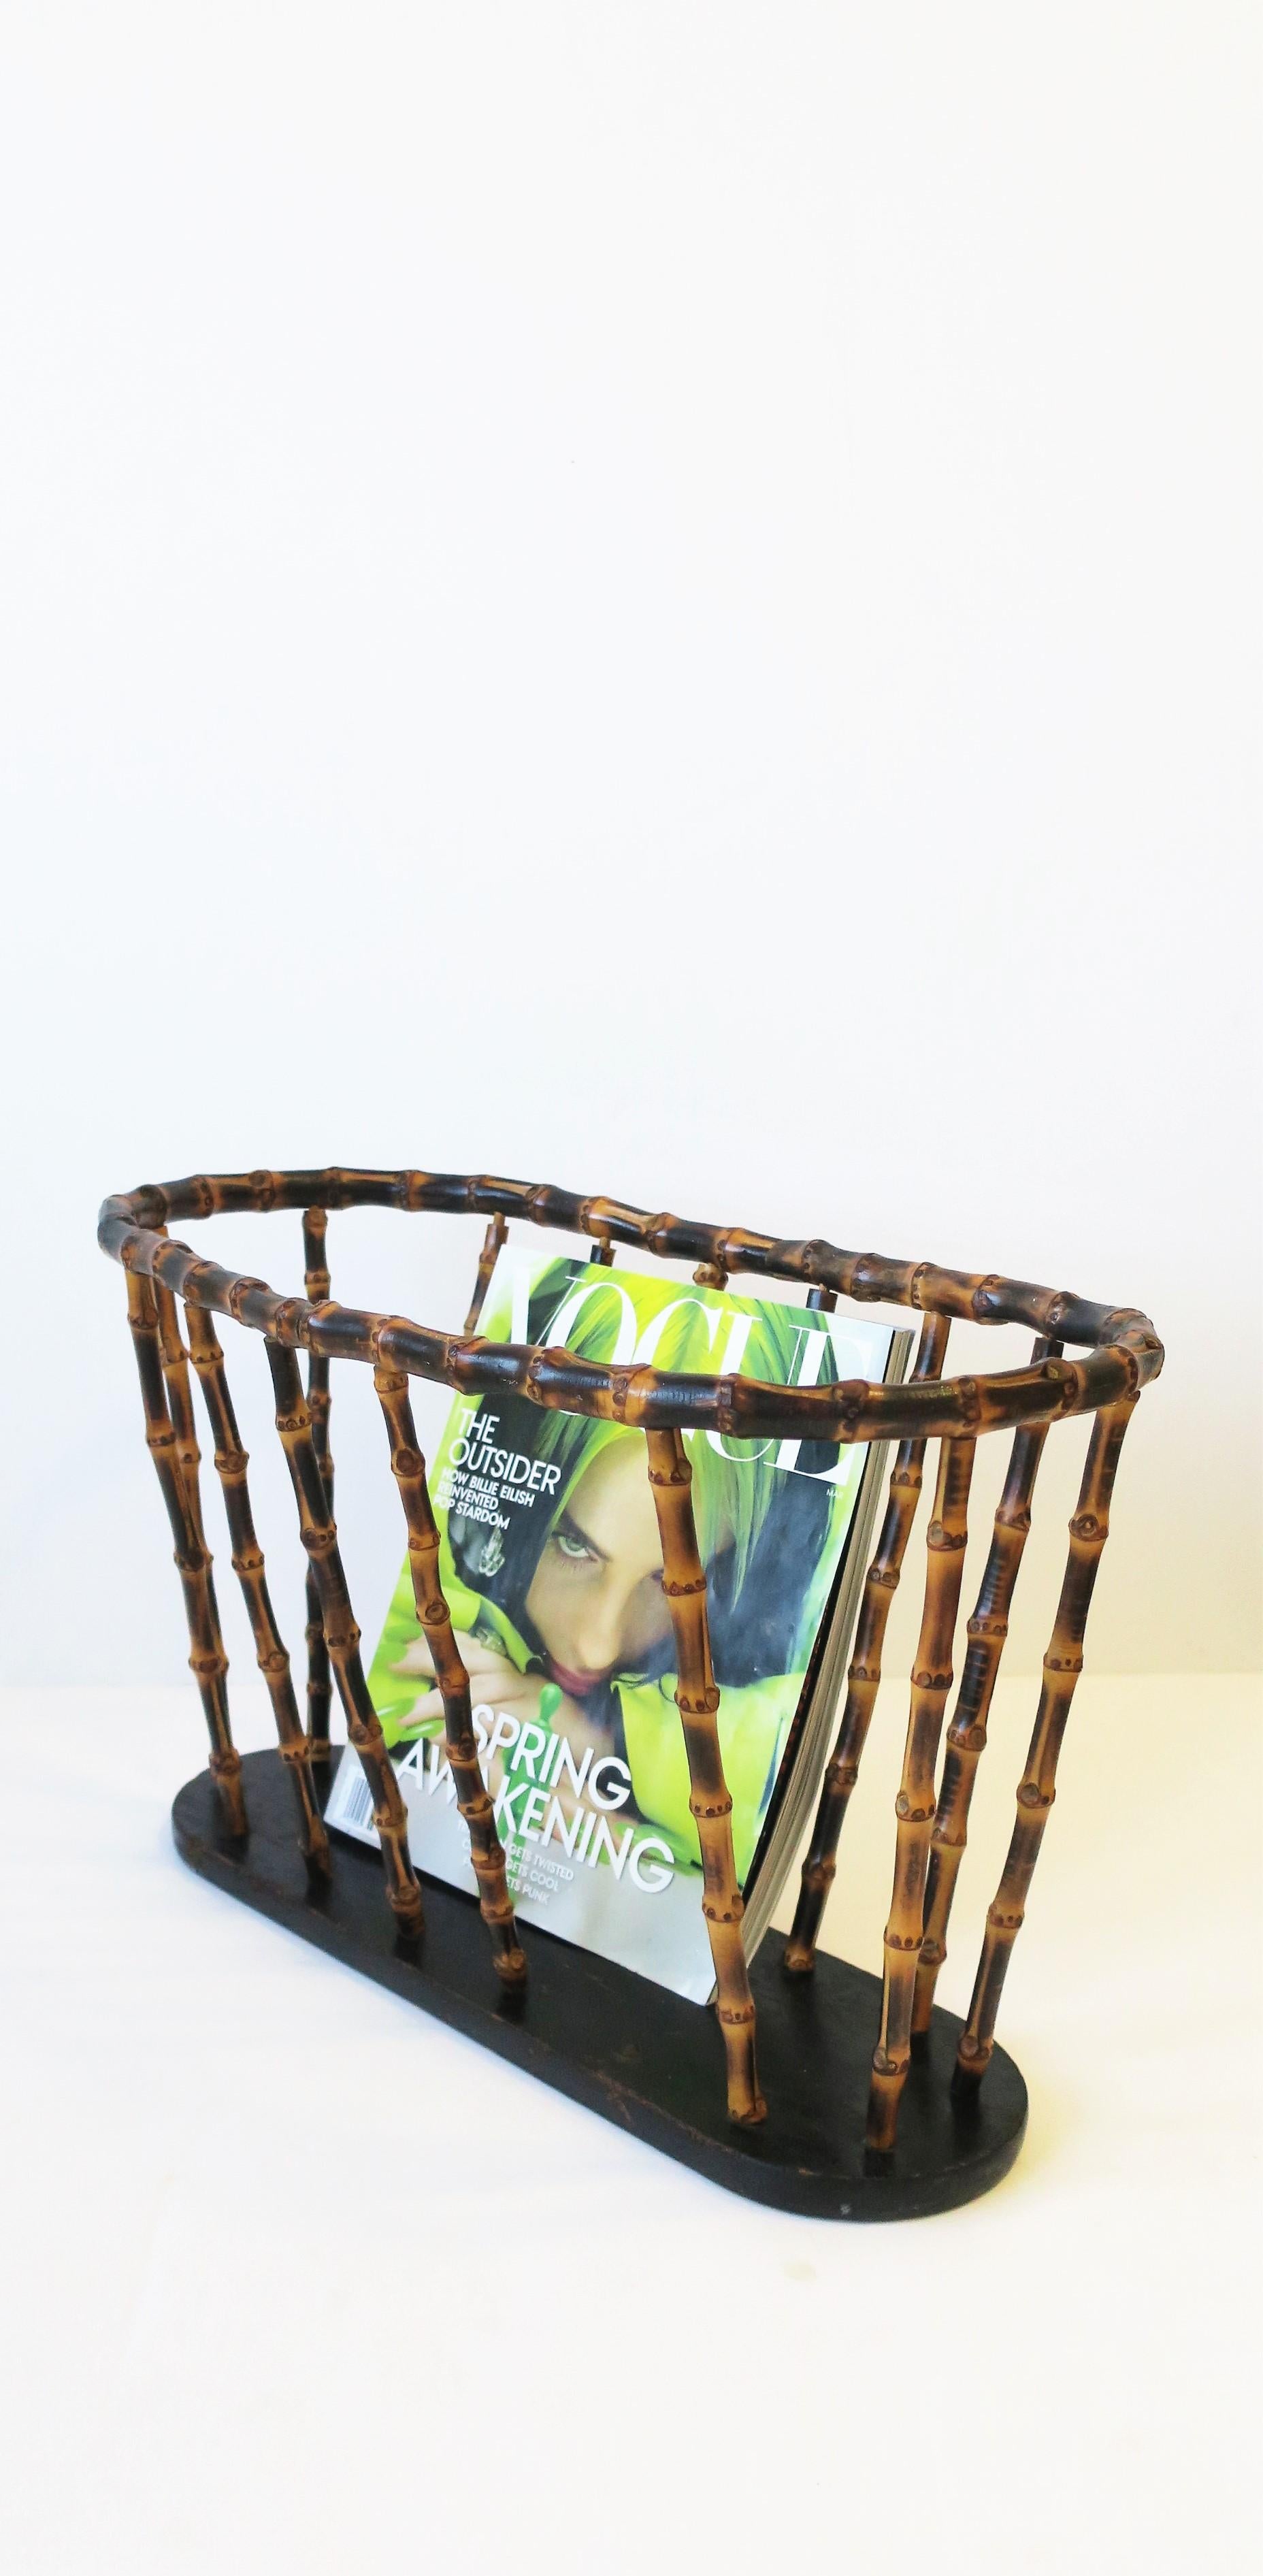 An oval or oblong bamboo magazine, newspaper or book holder 'basket', in the style of Gucci, circa mid-20th century, Italy. A great piece for home, office, library, etc. Dimensions: 10